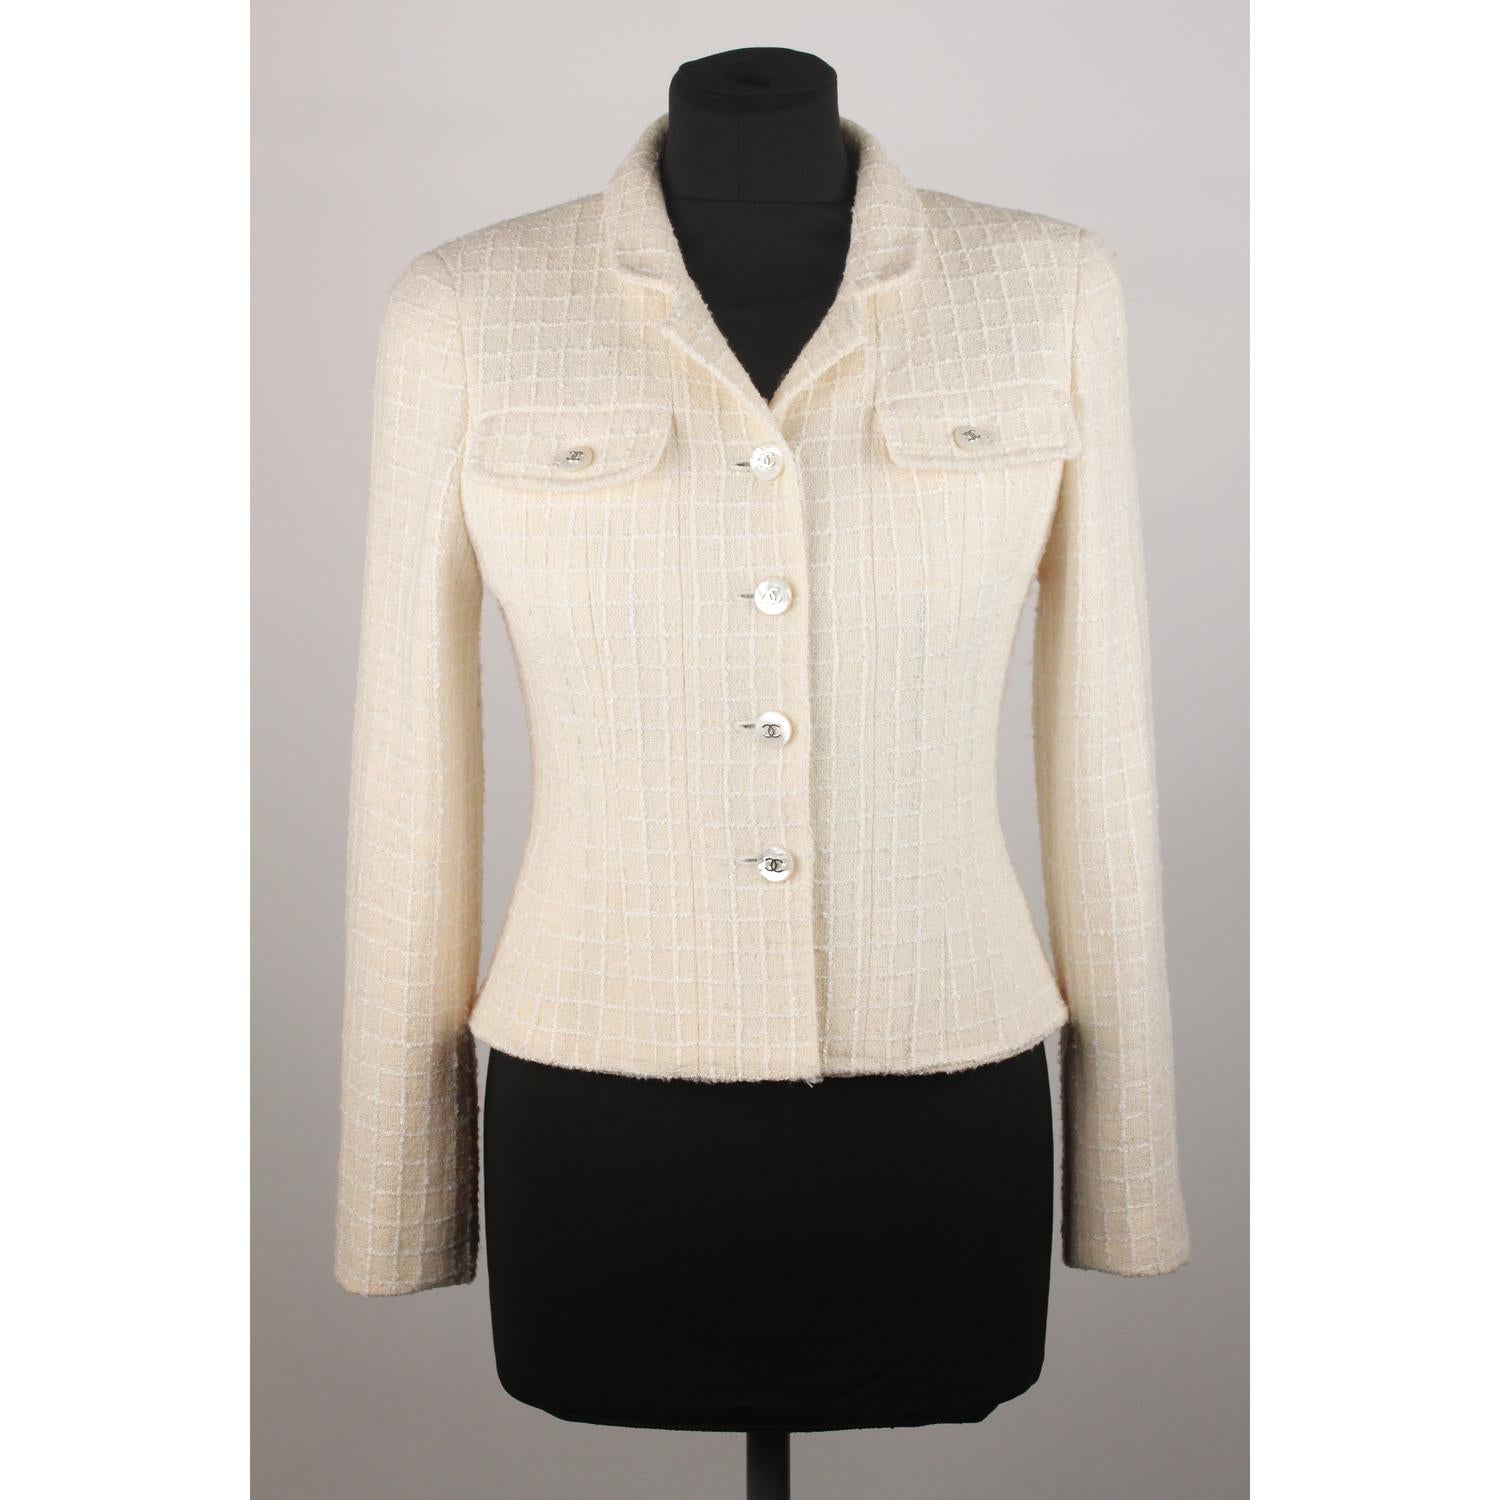 Chanel 97P  bouclé blazer in ivory color. It features 4 -button closures and buttoned cuffs with CC - Chanel logo buttons. Fully lined. Silver metal  chain detail on the hem (internally).  Made in France. Composition 56% wool, 35% nylon, 9% spandex.